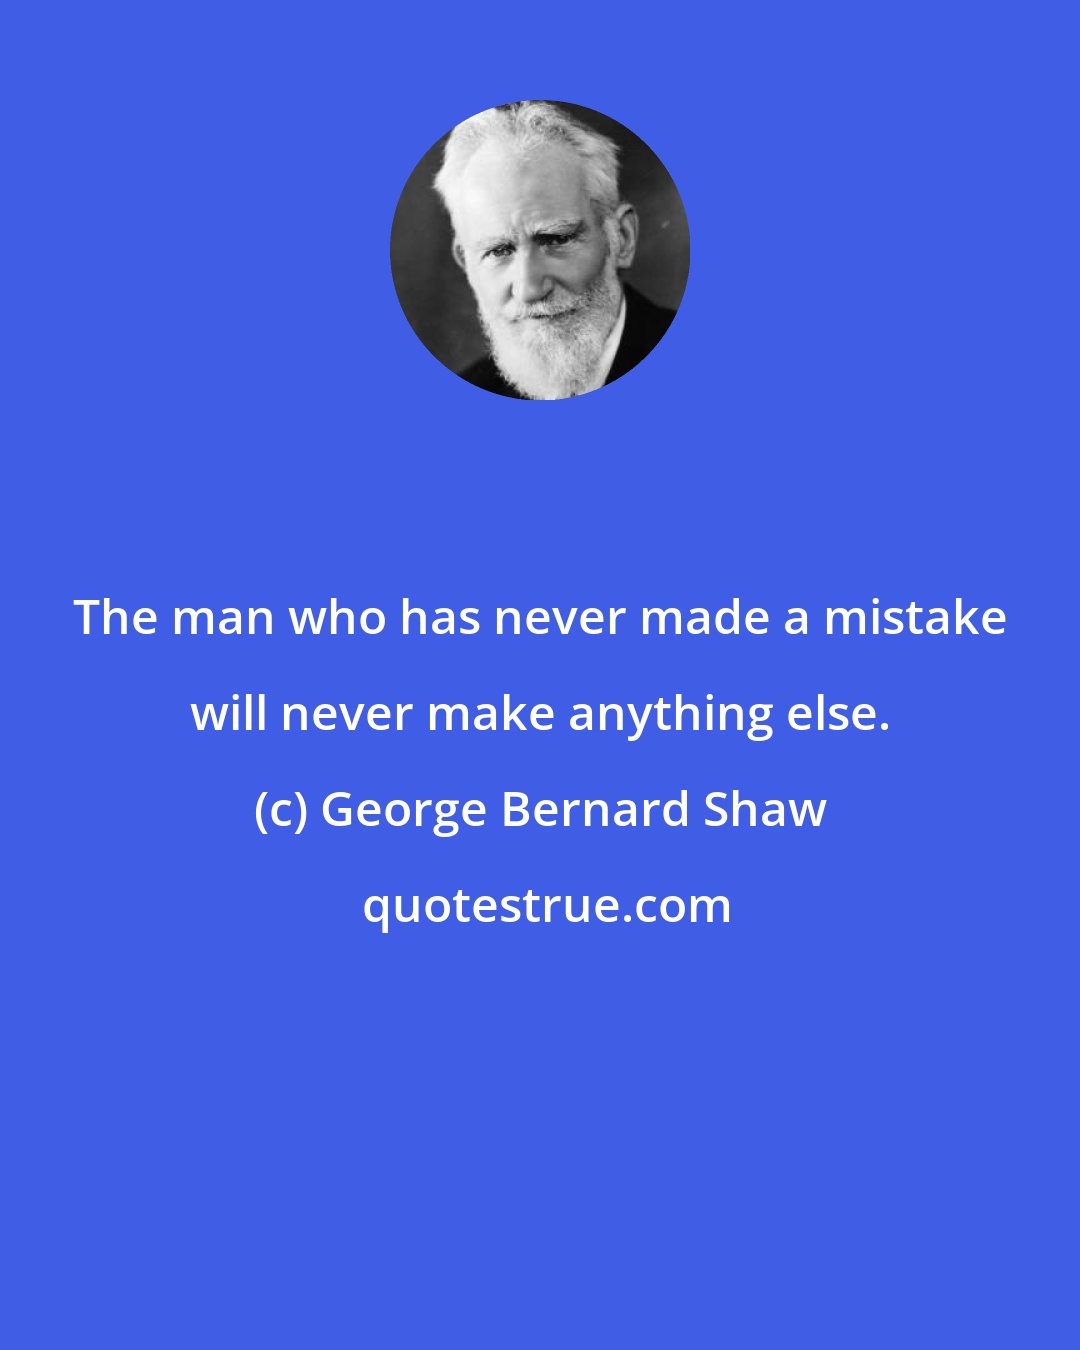 George Bernard Shaw: The man who has never made a mistake will never make anything else.